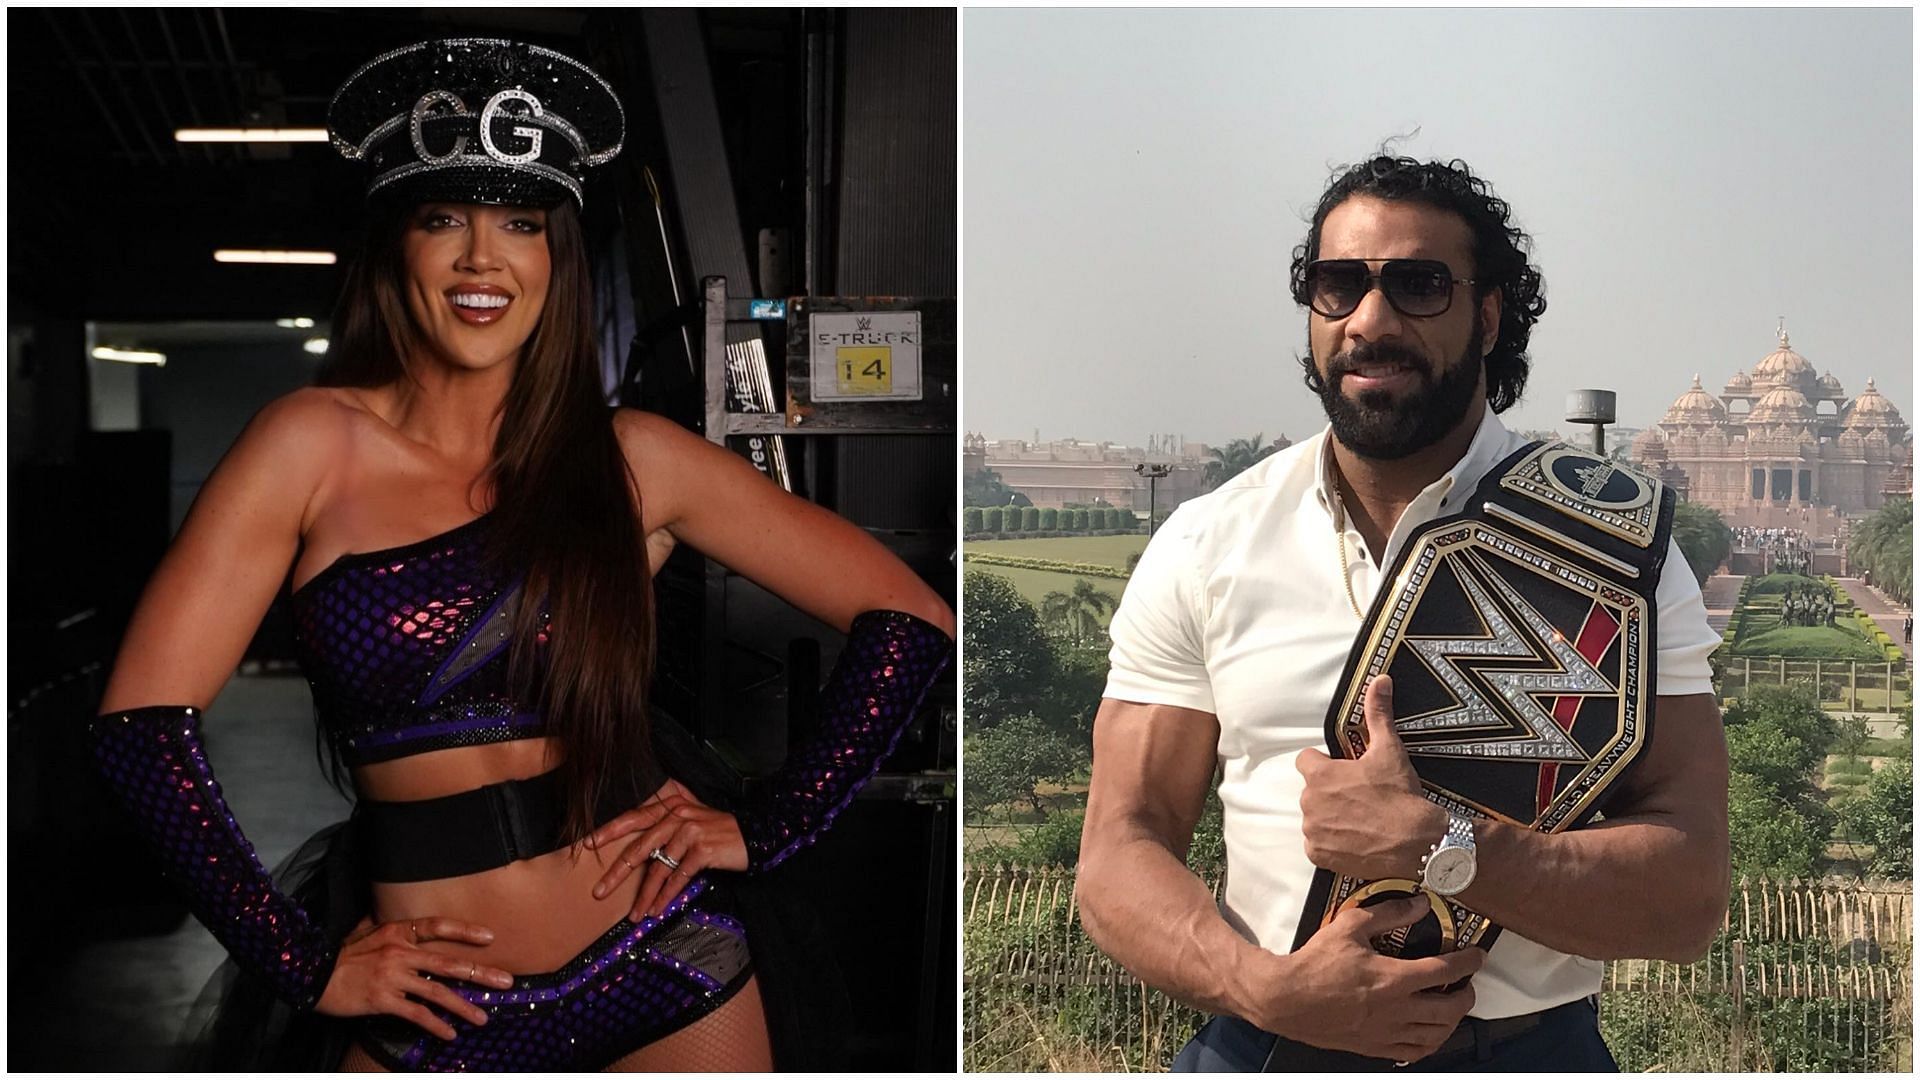 Chelsea Green (left), and Jinder Mahal (right).